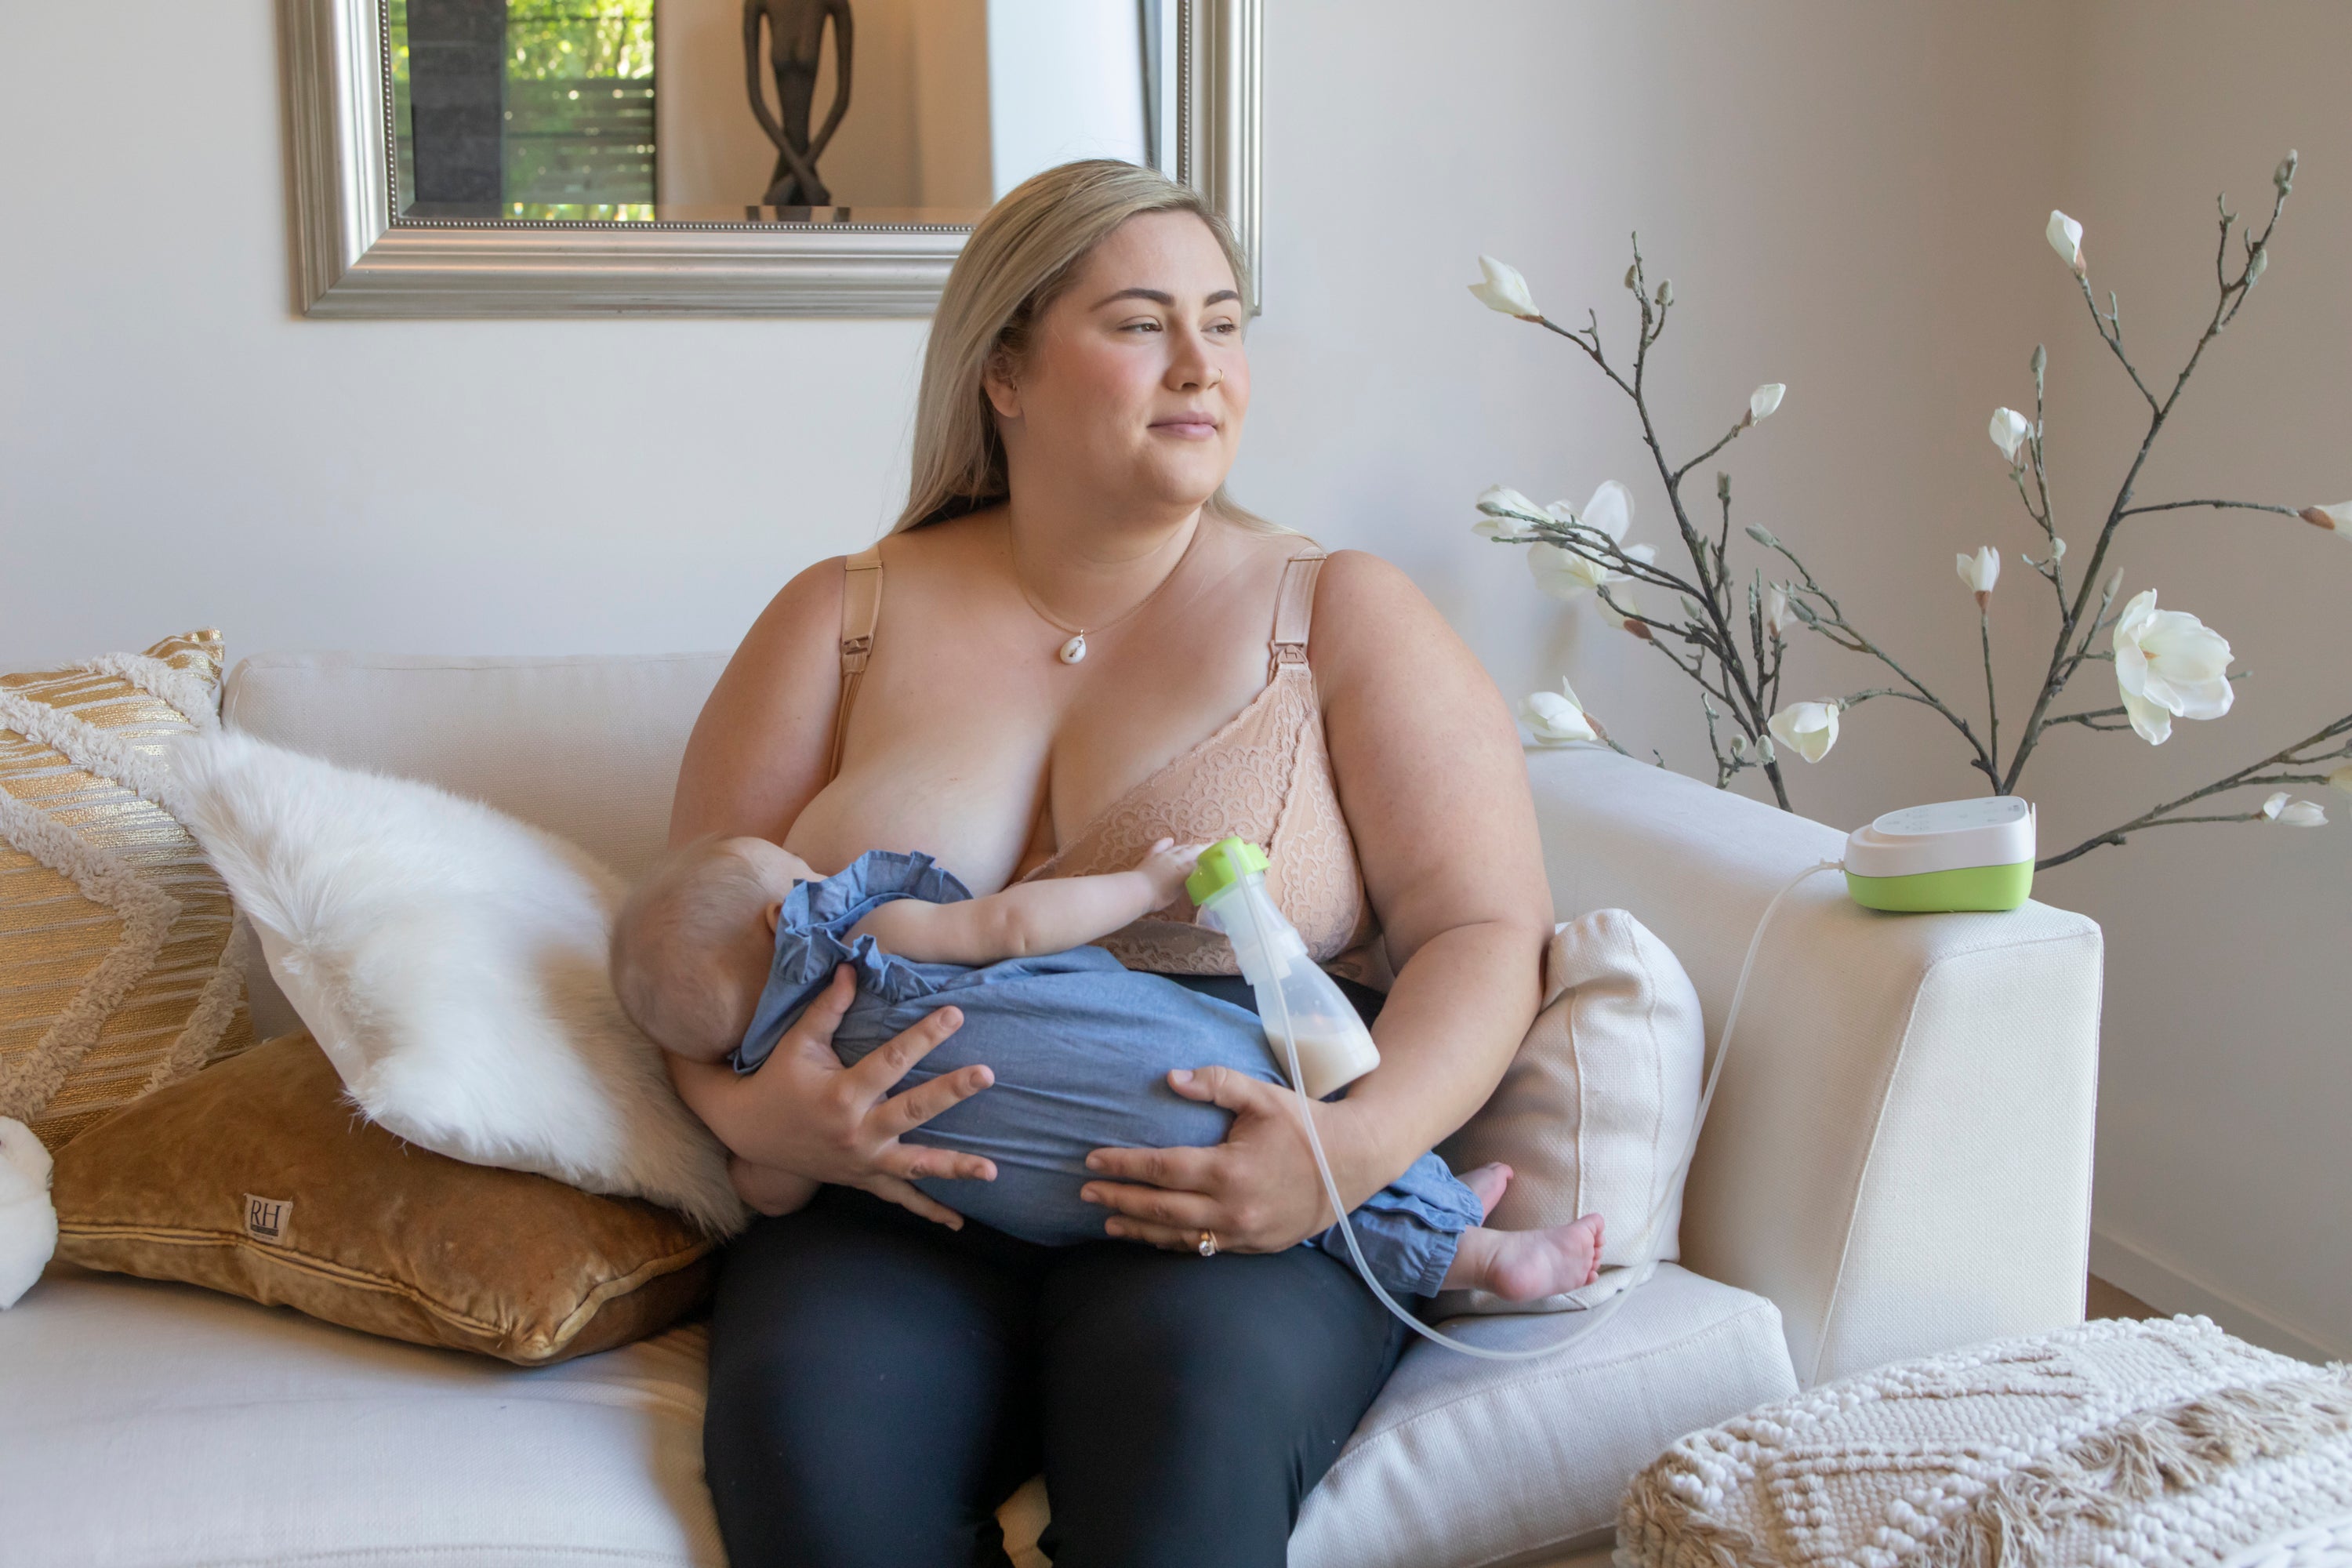  Mom nursing and pumping with baby